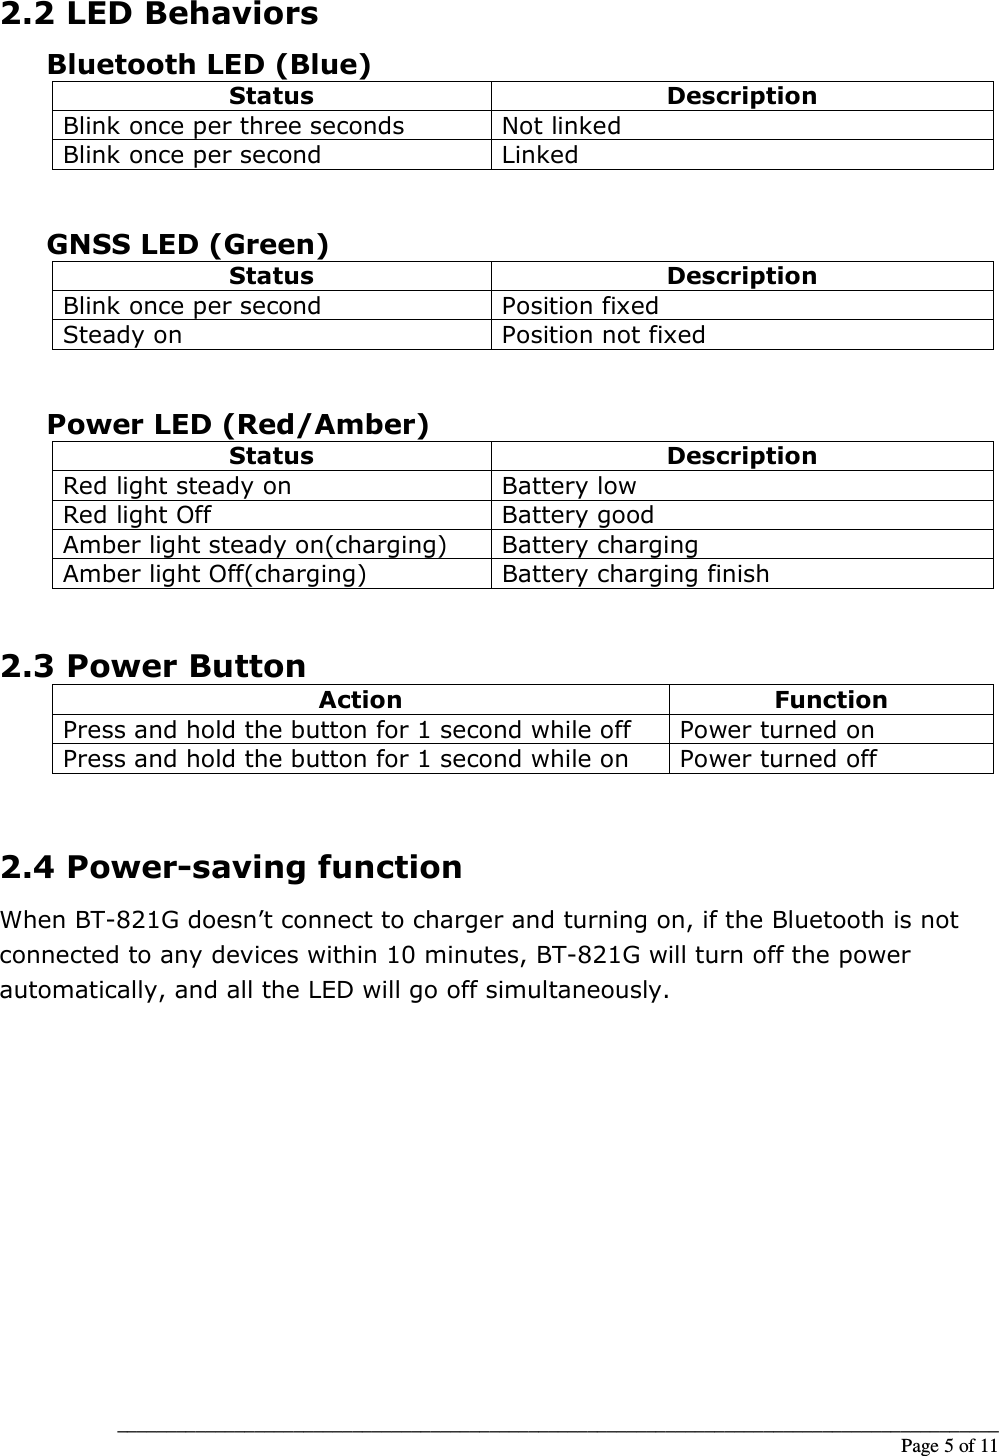 __________________________________________________________________________________________                                                                                                                                                             Page 5 of 11 2.2 LED Behaviors Bluetooth LED (Blue) Status  Description Blink once per three seconds Not linked Blink once per second Linked   GNSS LED (Green) Status  Description Blink once per second Position fixed Steady on Position not fixed   Power LED (Red/Amber) Status  Description Red light steady on Battery low Red light Off Battery good Amber light steady on(charging) Battery charging Amber light Off(charging)  Battery charging finish   2.3 Power Button Action  Function Press and hold the button for 1 second while off Power turned on Press and hold the button for 1 second while on Power turned off   2.4 Power-saving function When BT-821G doesn’t connect to charger and turning on, if the Bluetooth is not connected to any devices within 10 minutes, BT-821G will turn off the power automatically, and all the LED will go off simultaneously.               